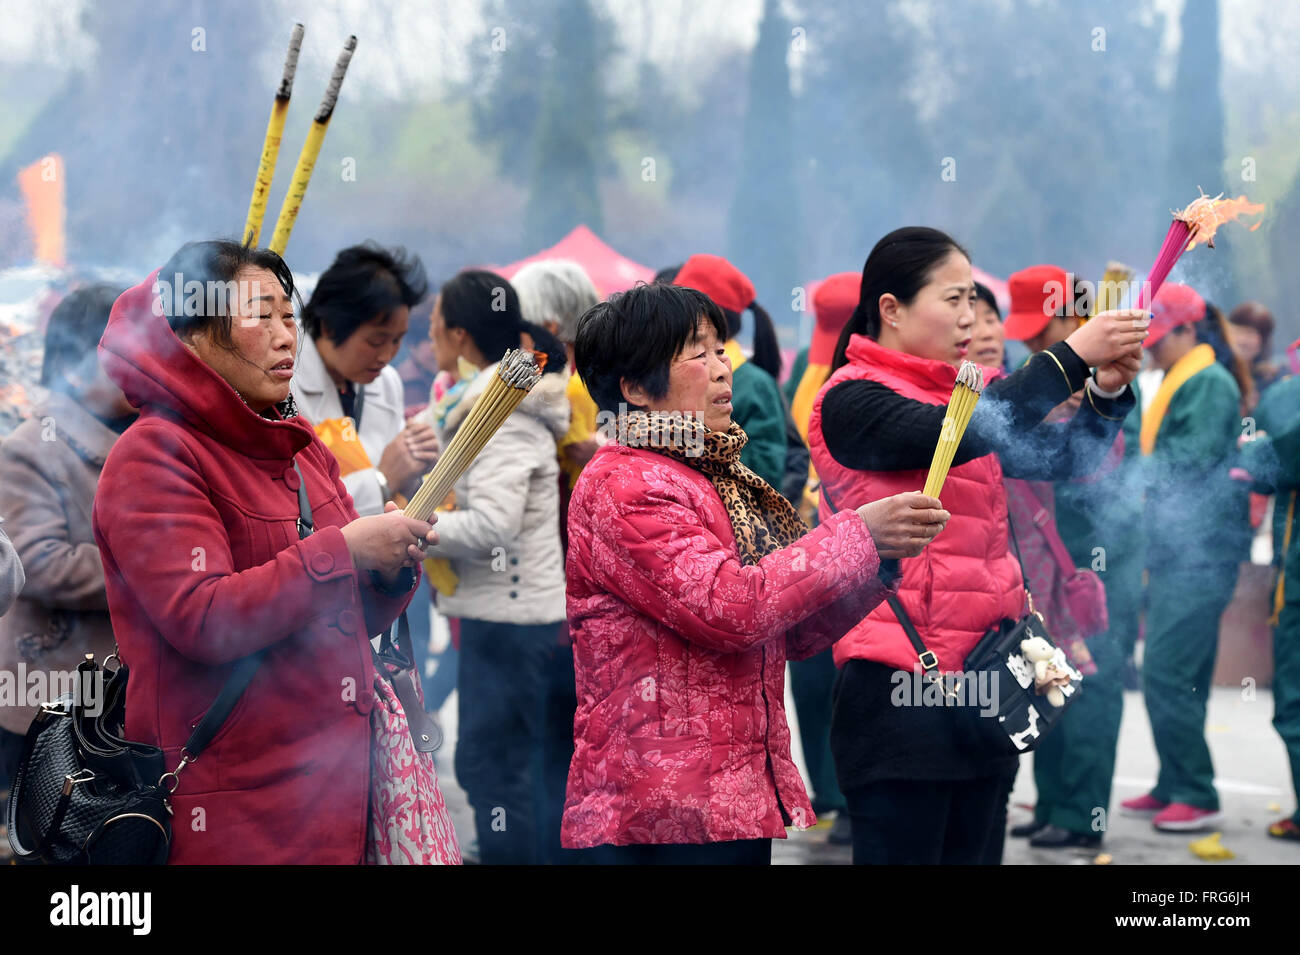 Luyi, China's Henan Province. 23rd Mar, 2016. People worship Laozi (or Lao-tzu, Lao-tse 604-531 BC) during a memorial ceremony for Laozi 2,587th birth anniversary at Taiqing Palace in Luyi County, central China's Henan Province, March 23, 2016. Laozi, best known as the author of the Tao Te Ching, is traditionally considered as the founder of Taoism. © Li Bo/Xinhua/Alamy Live News Stock Photo